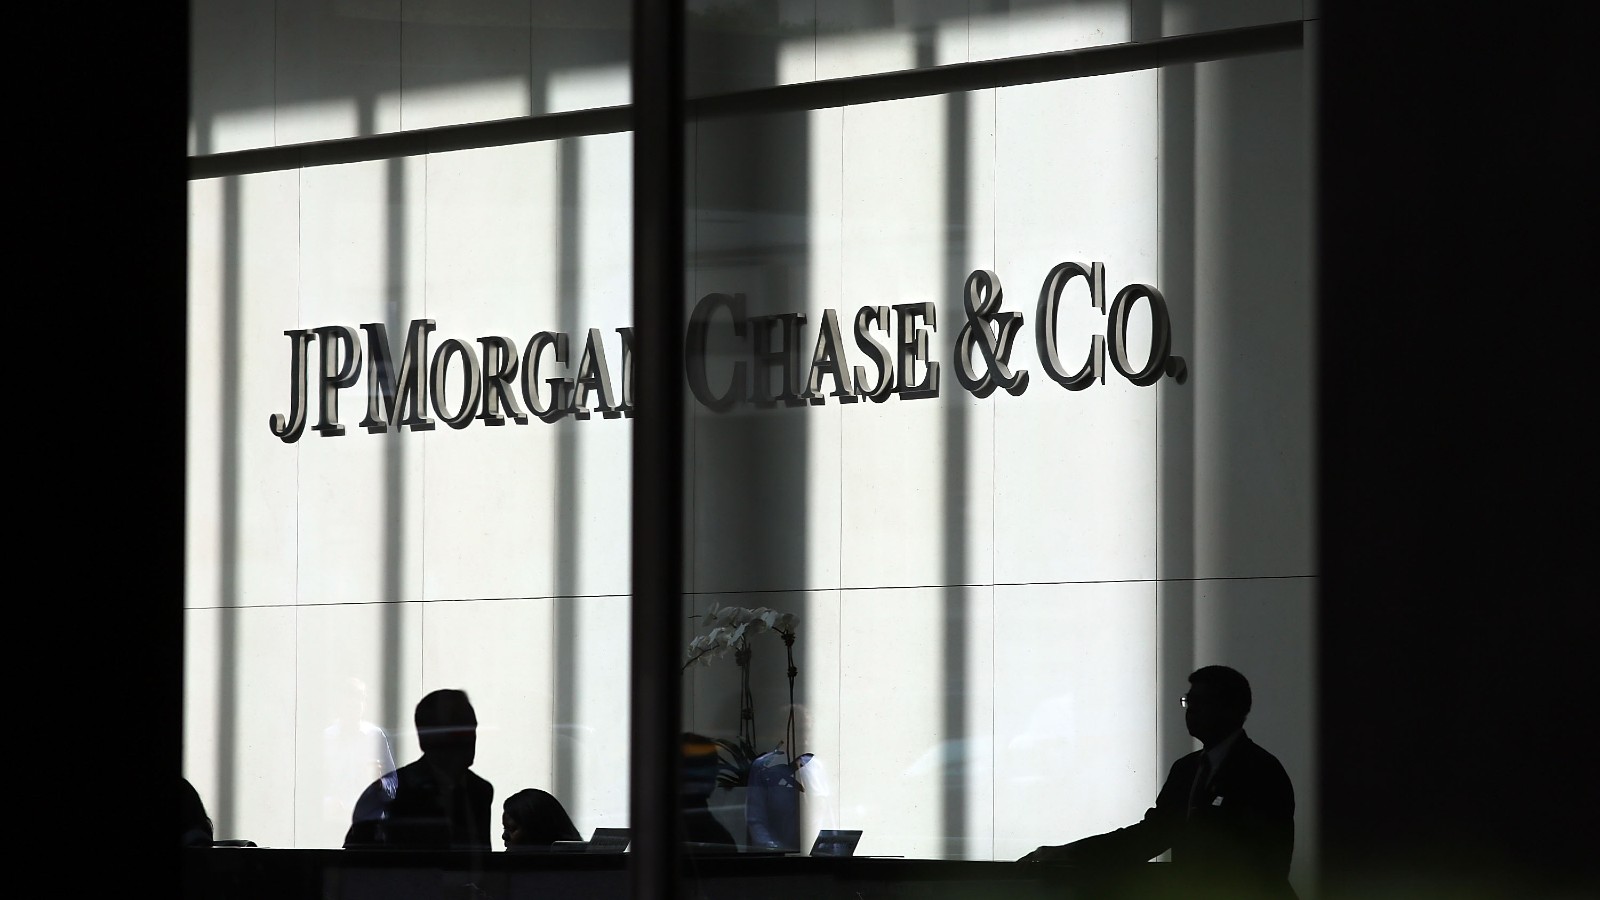 a photo of JPMorgan offices with people standing inside covered in shadow, company name is on the wall